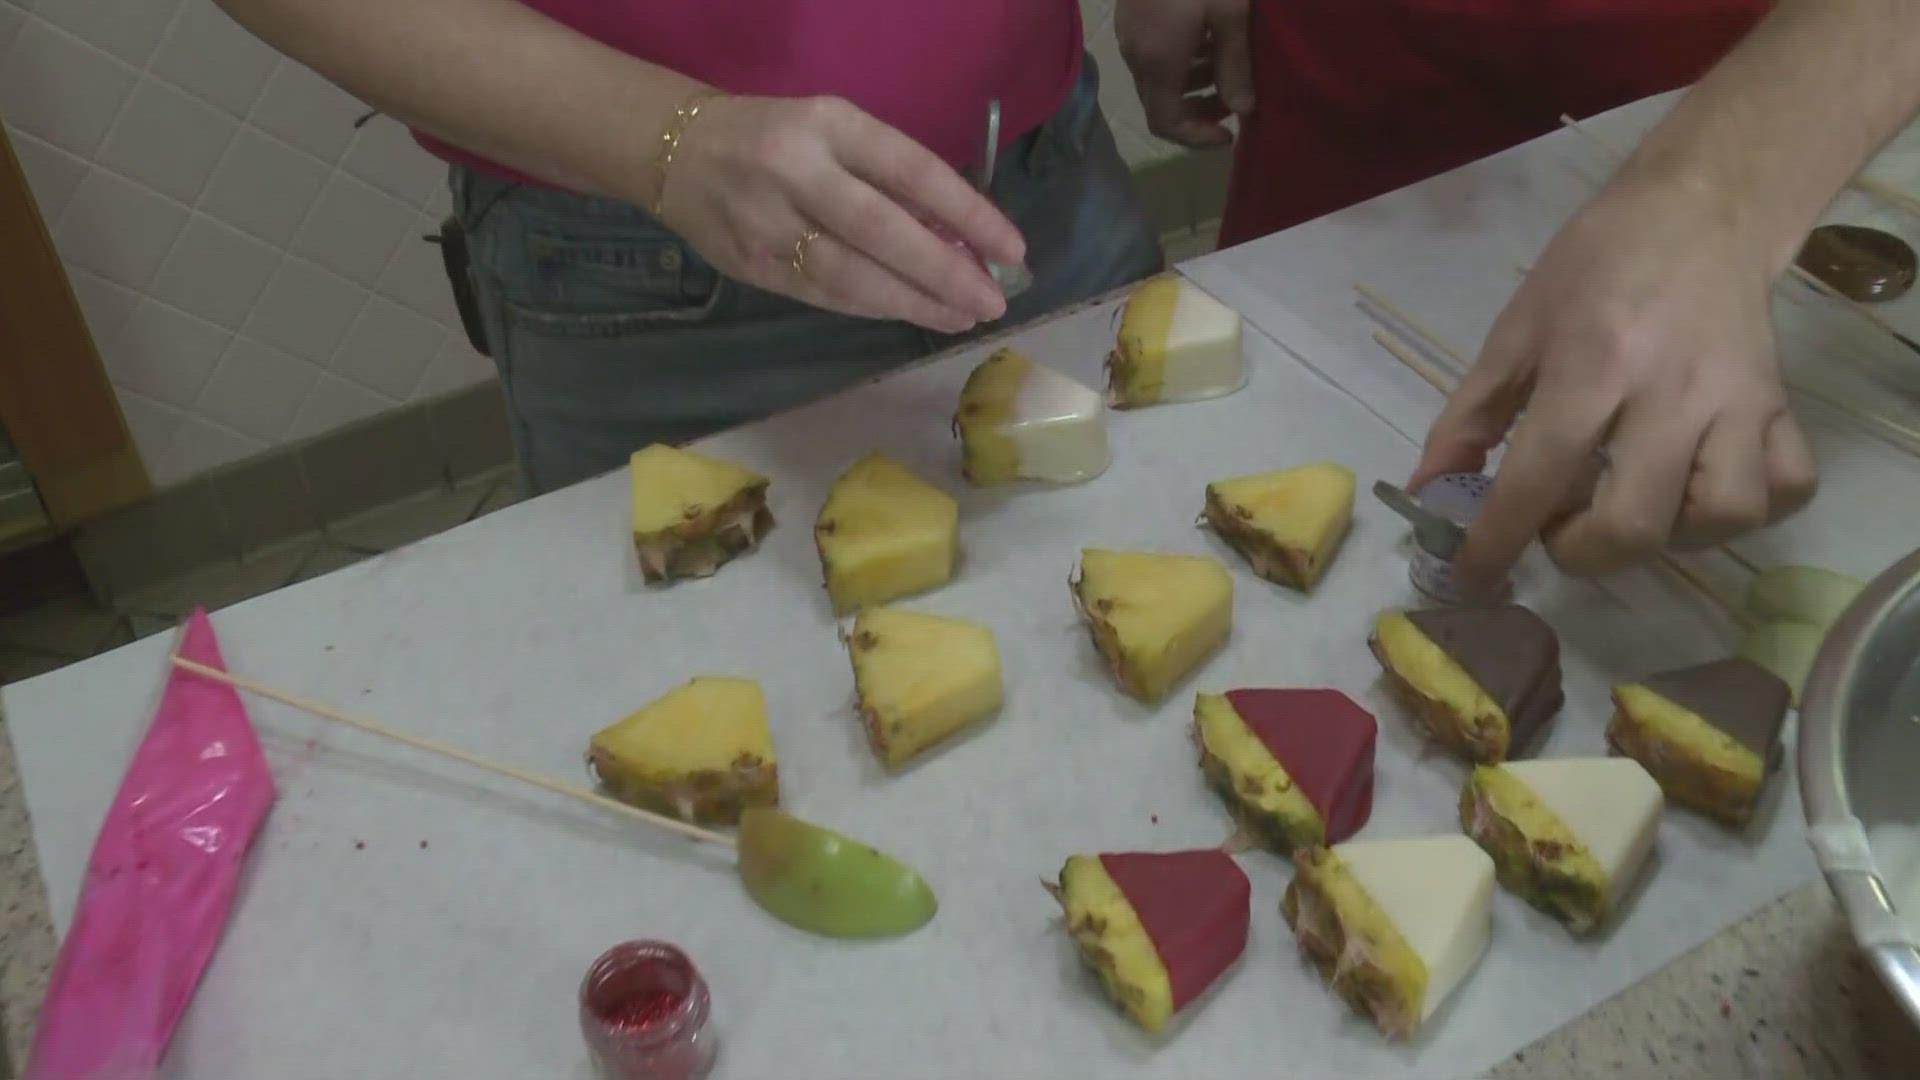 NEWS CENTER Maine's Aaron Myler went to Sisters Gourmet Deli in Bath, where they're making some holiday treats.